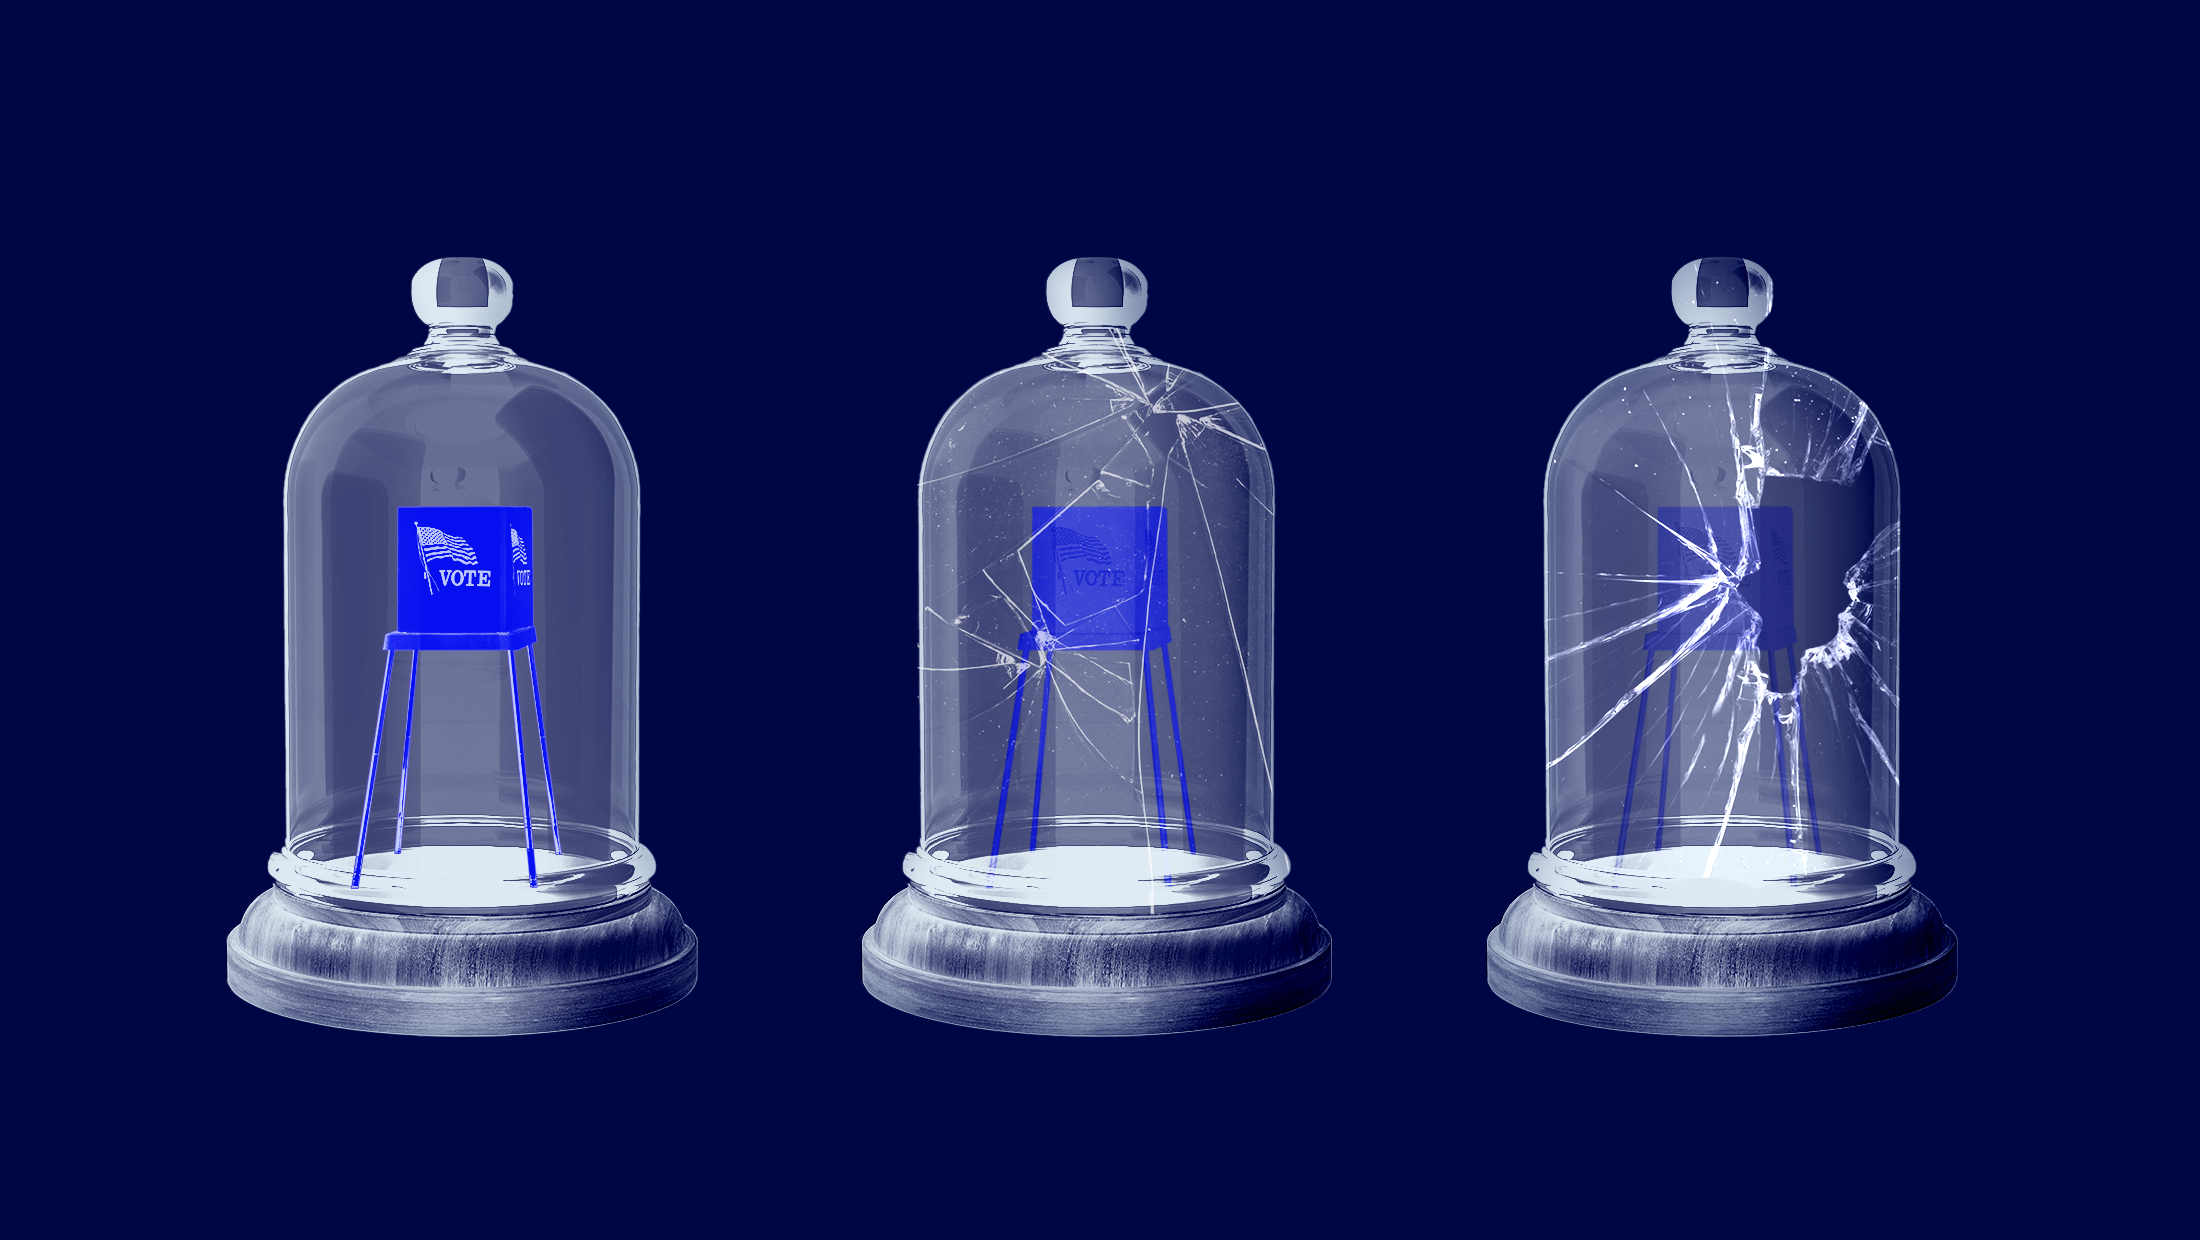 Three clear glass dome cloches next to each other over a dark blue background. The one on the far left has a sign labelled "VOTE" in blue inside of it, the one in the middle is cracked and the blue "VOTE" sign is faded, and the one on the far right is even more cracked with a hole broken through the glass and the blue "VOTE" sign even more faded.